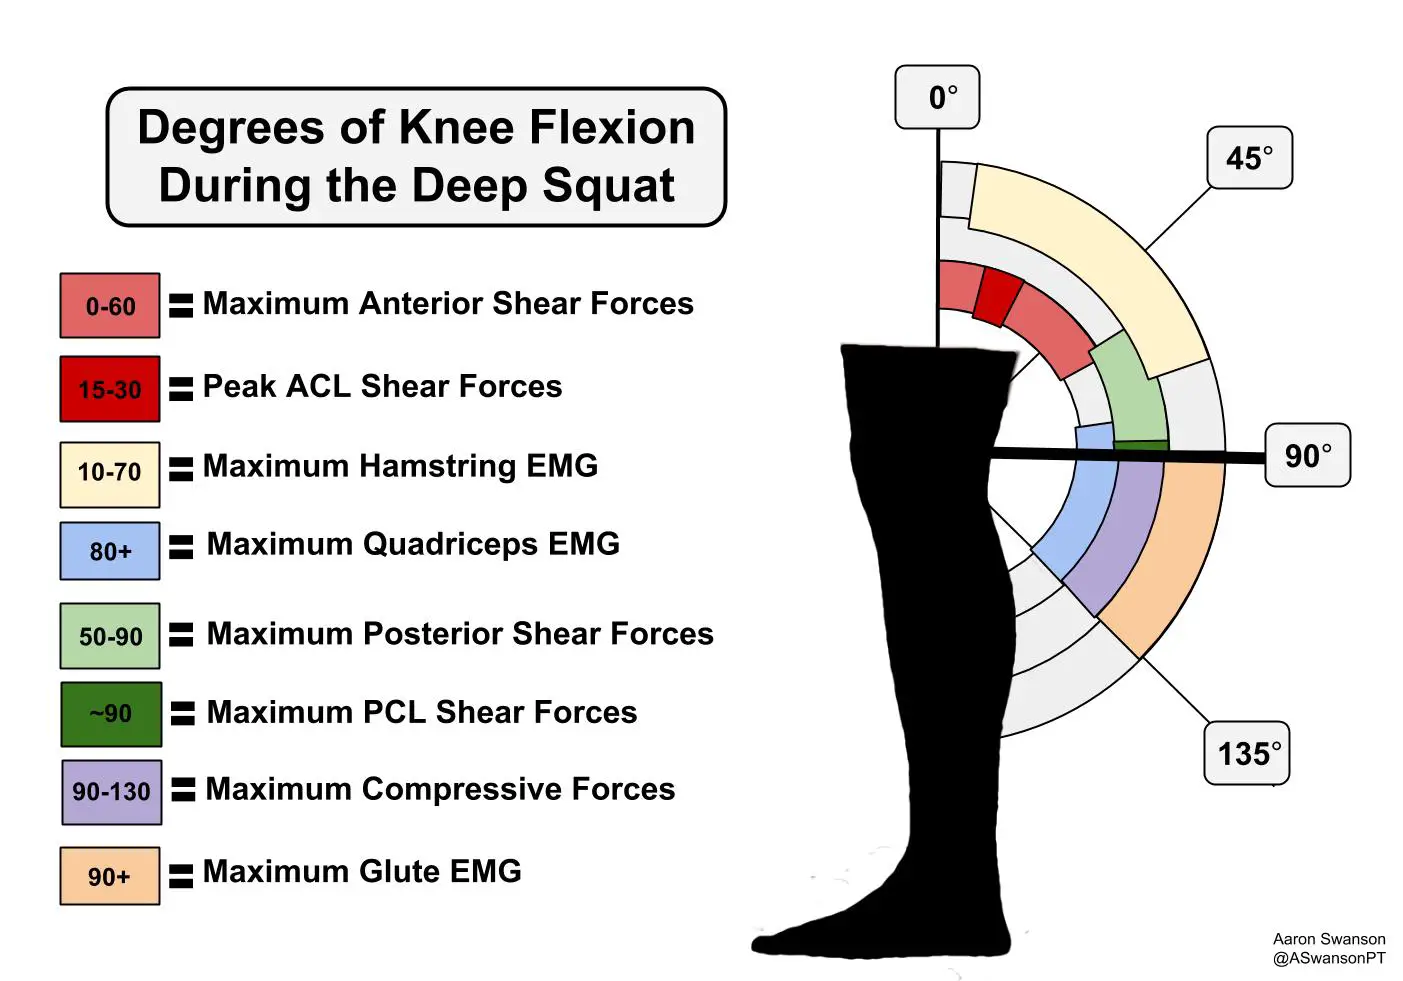 Squat forces and muscle activity